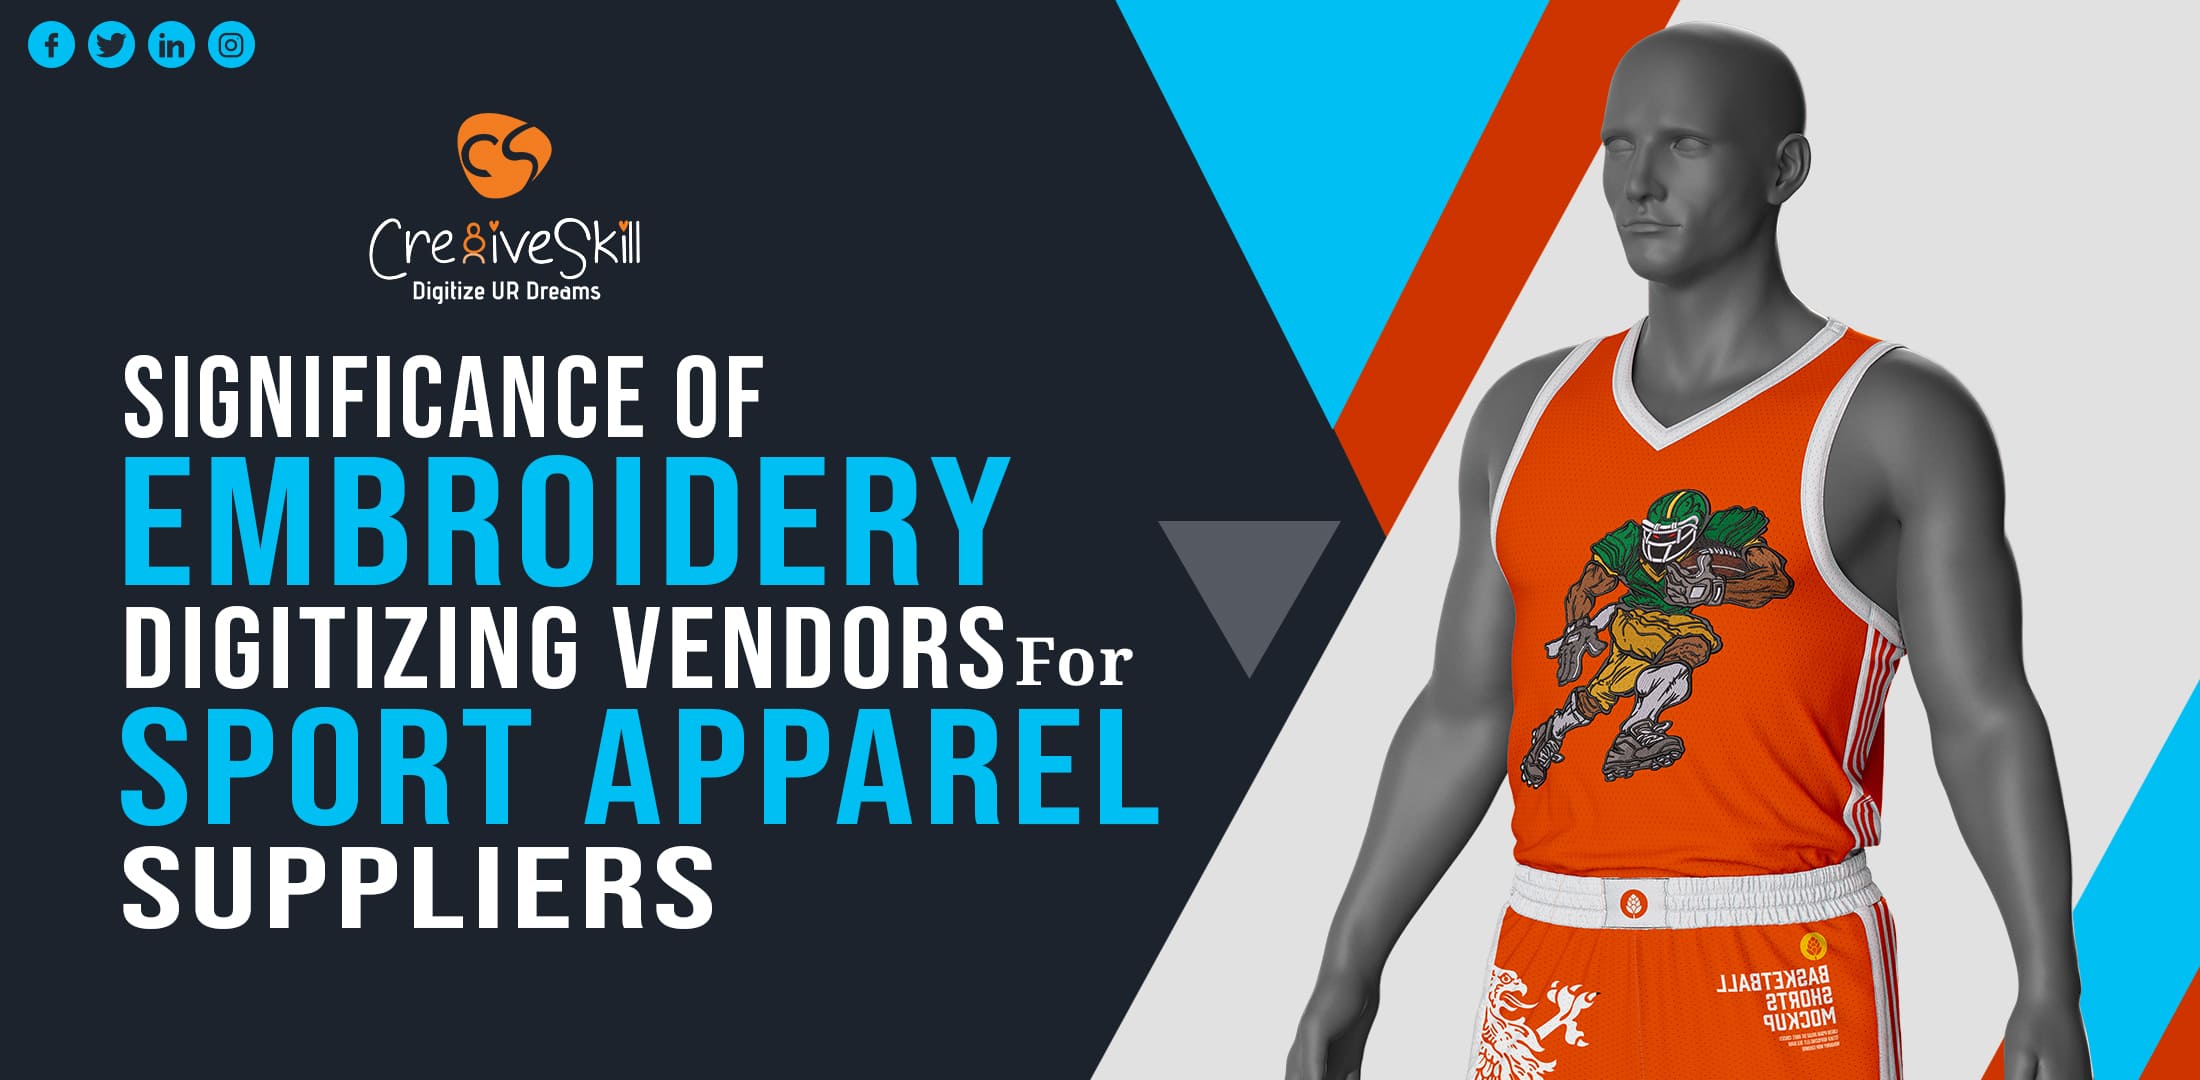 Importance Of Embroidery Digitizing Vendors For Sport Apparel Suppliers - Cre8iveSkill